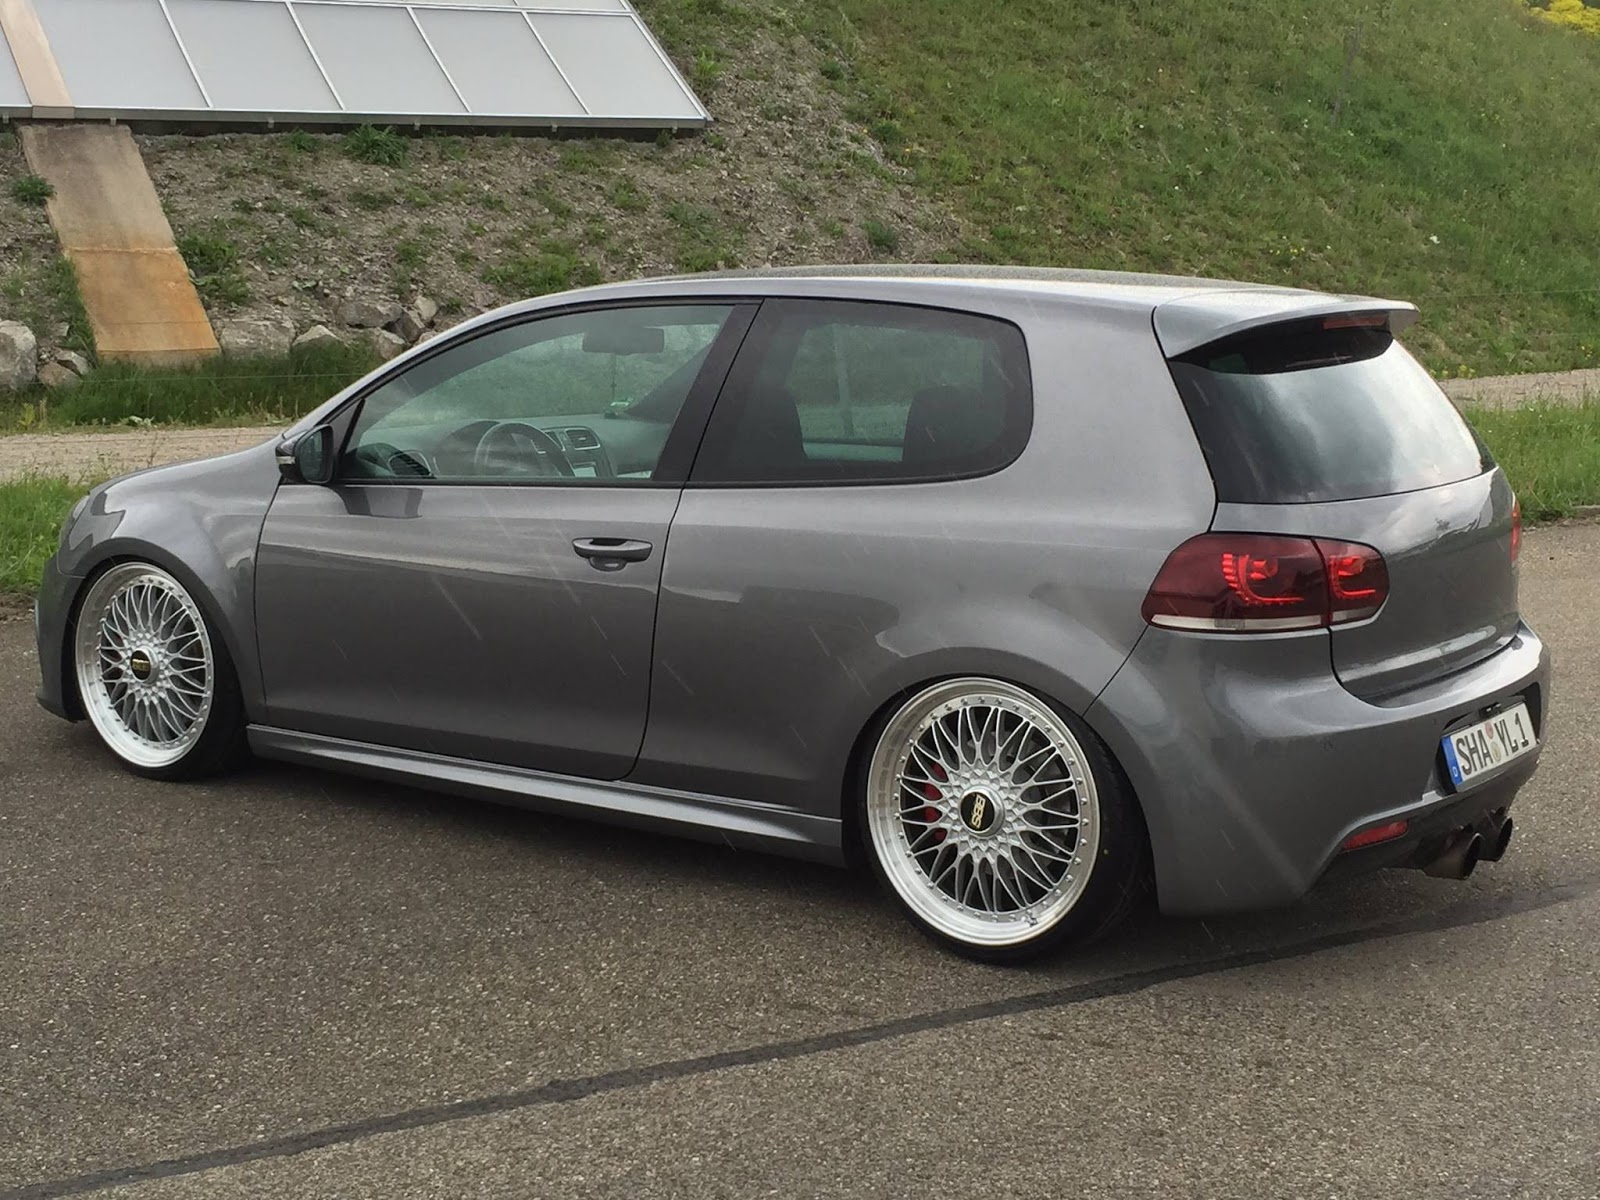 Cool Looking VW Golf Mark 6 By TVW From Wörthersee Carscoops